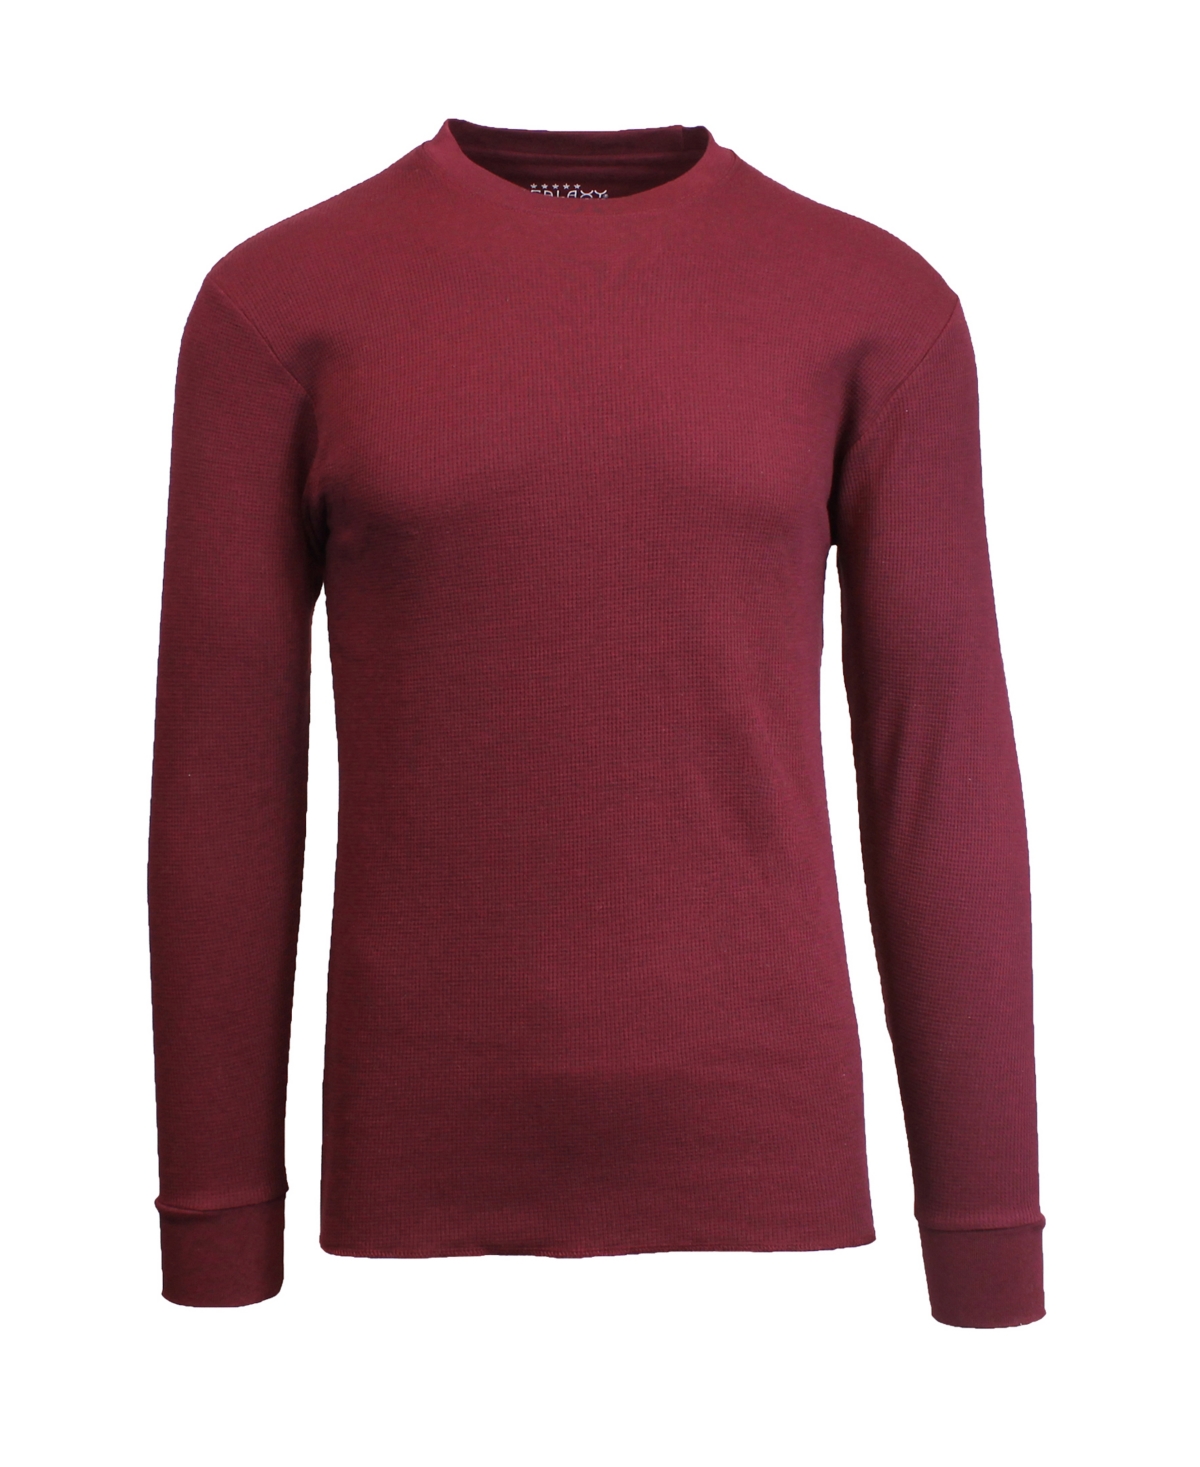 Shop Galaxy By Harvic Men's Oversized Long Sleeve Thermal Shirt In Burgundy